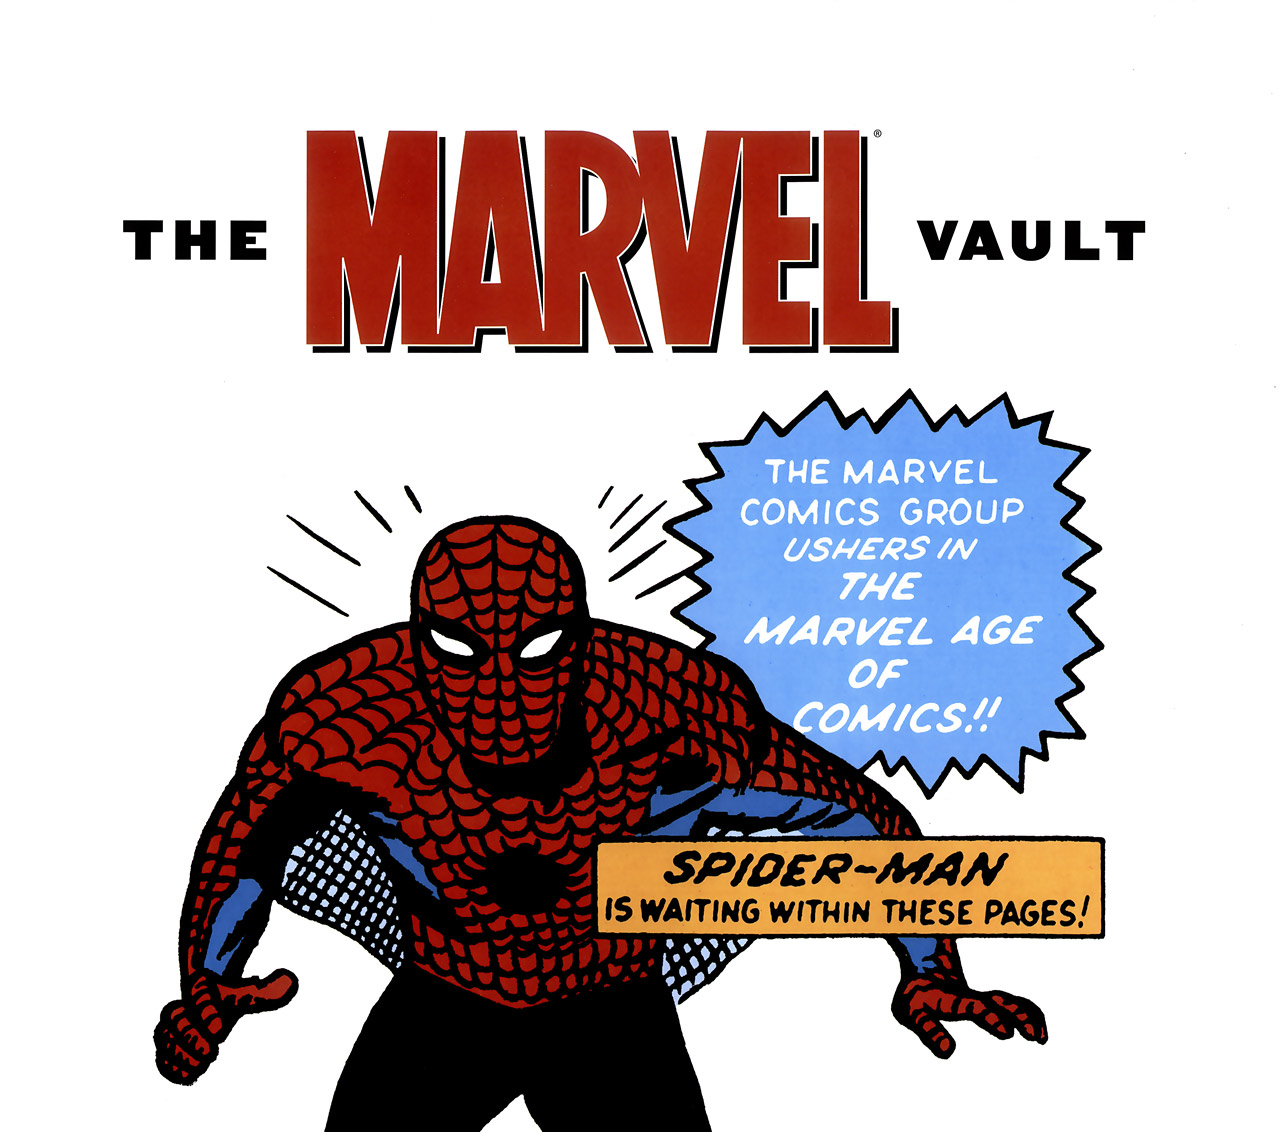 Read online The Marvel Vault comic -  Issue # TPB - 5